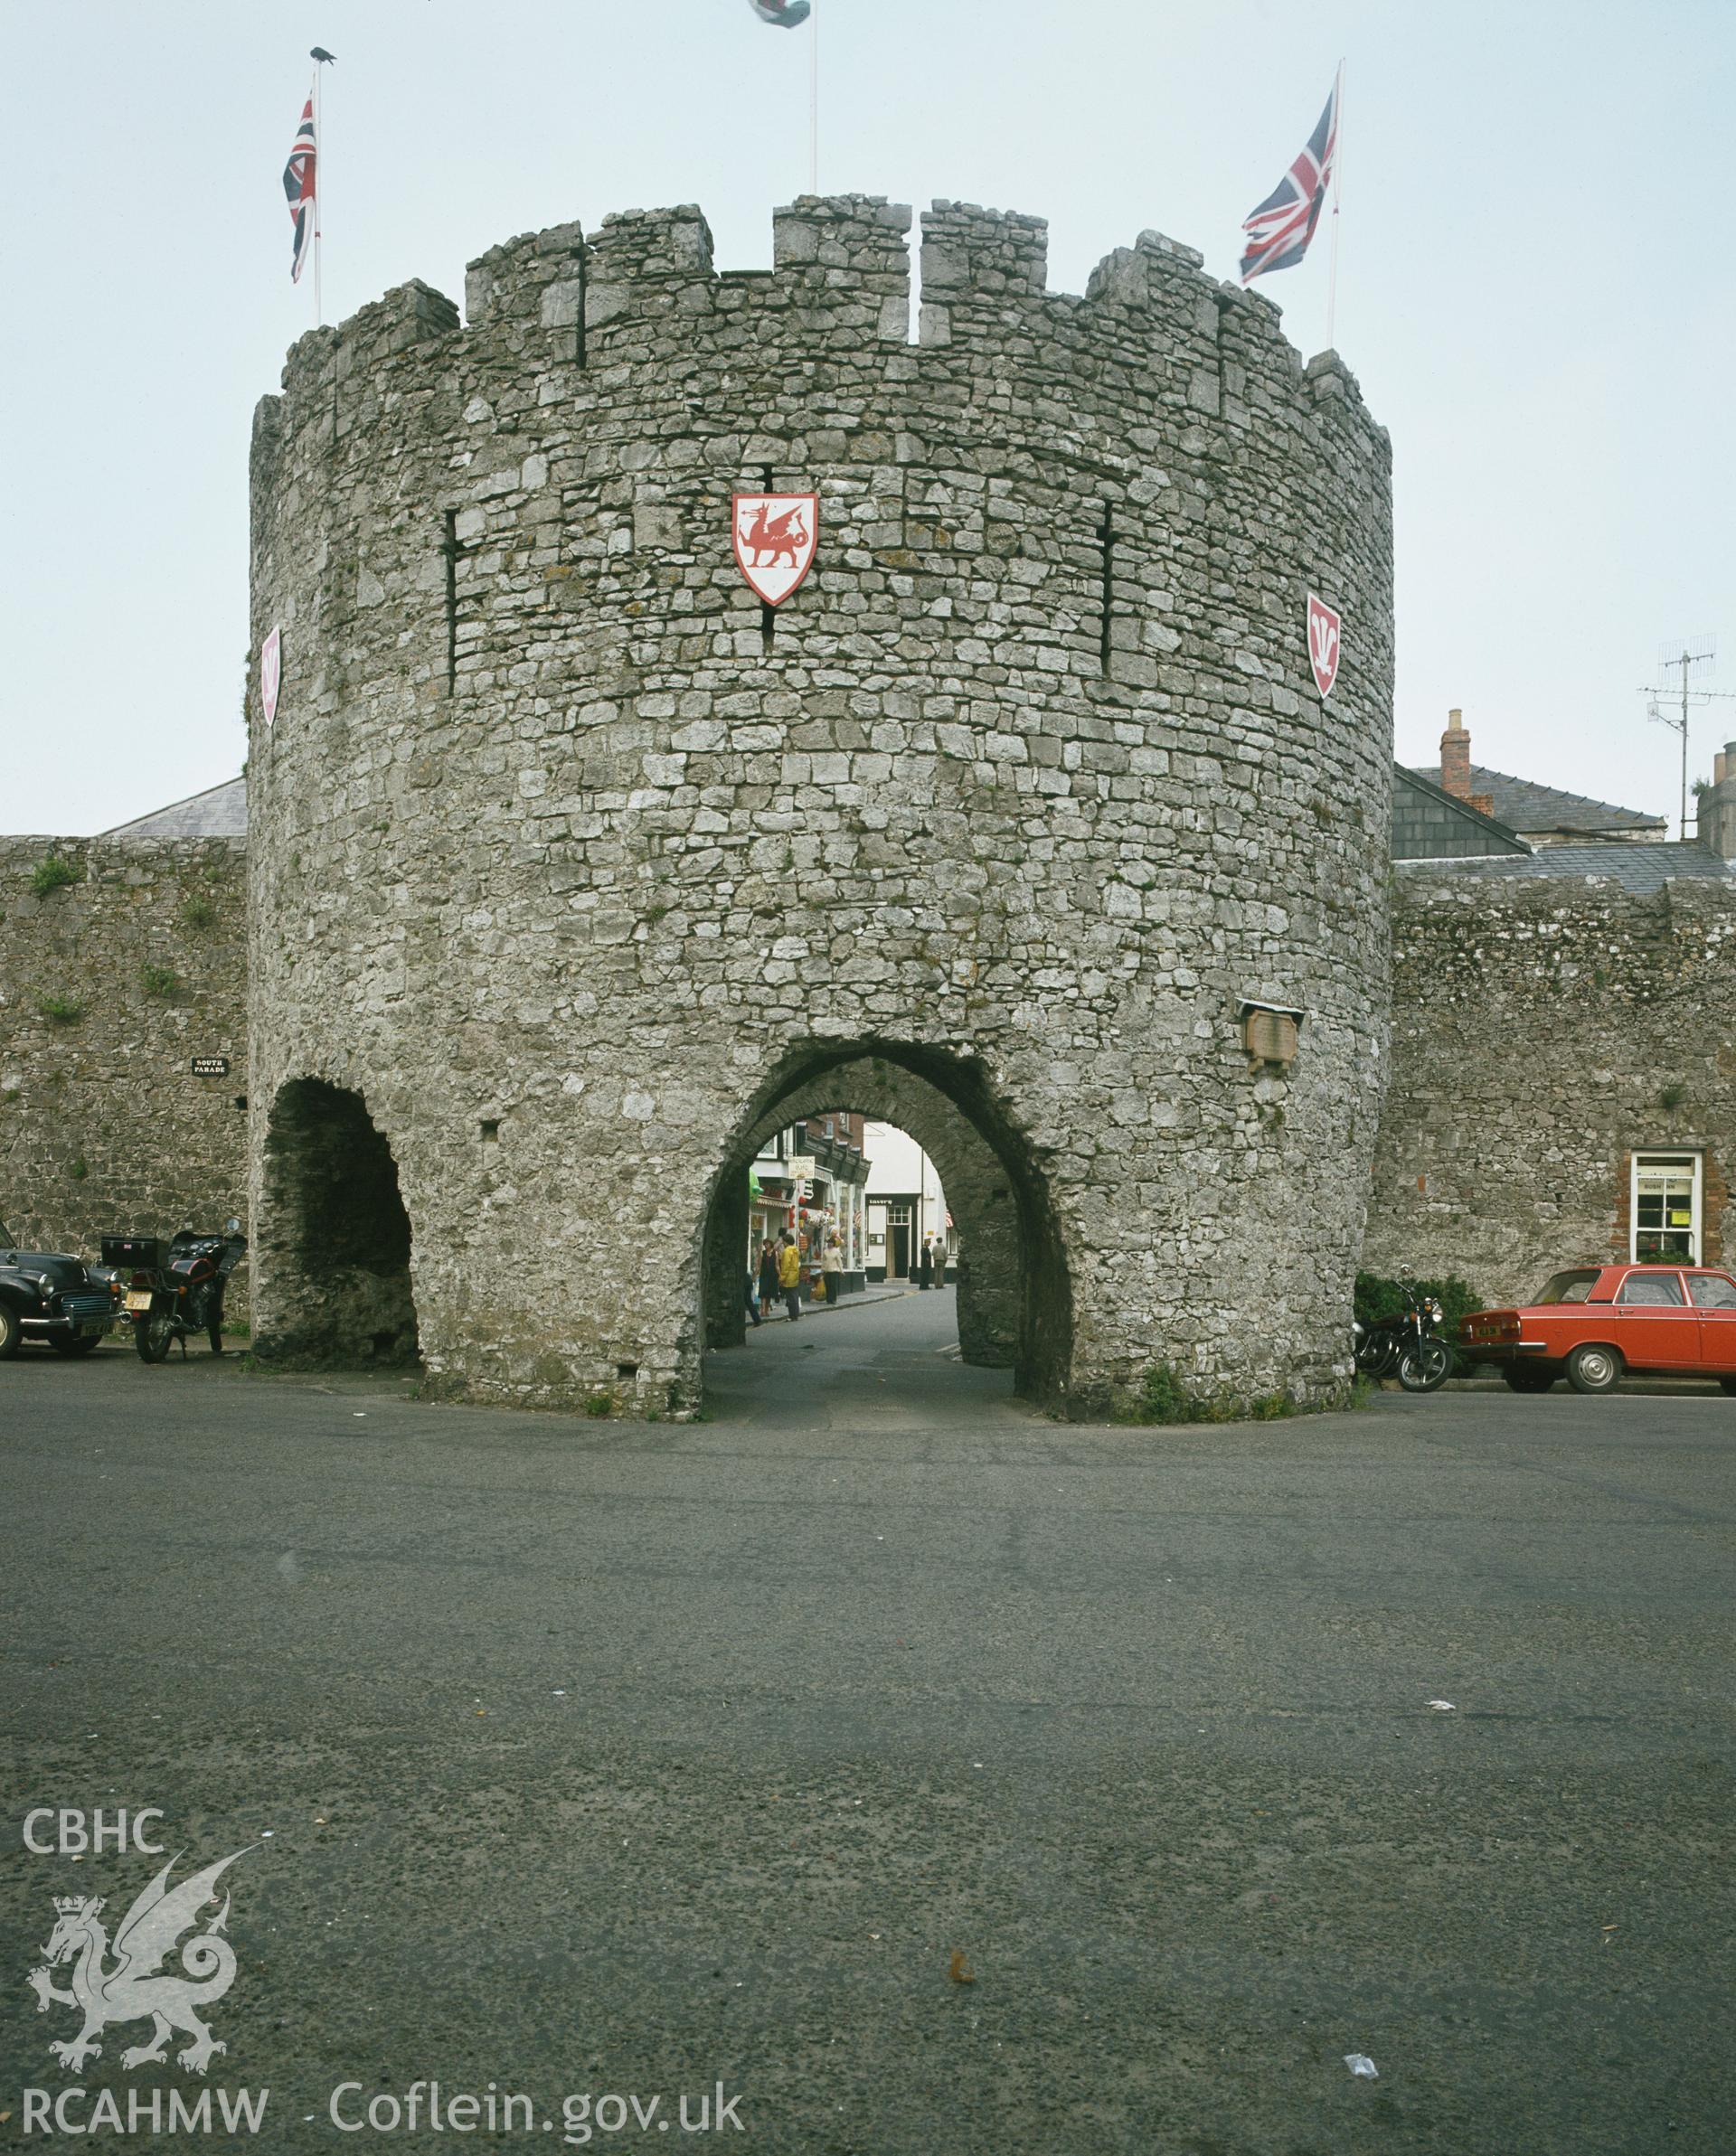 RCAHMW colour transparency showing view of gateway in Tenby Town Wall.